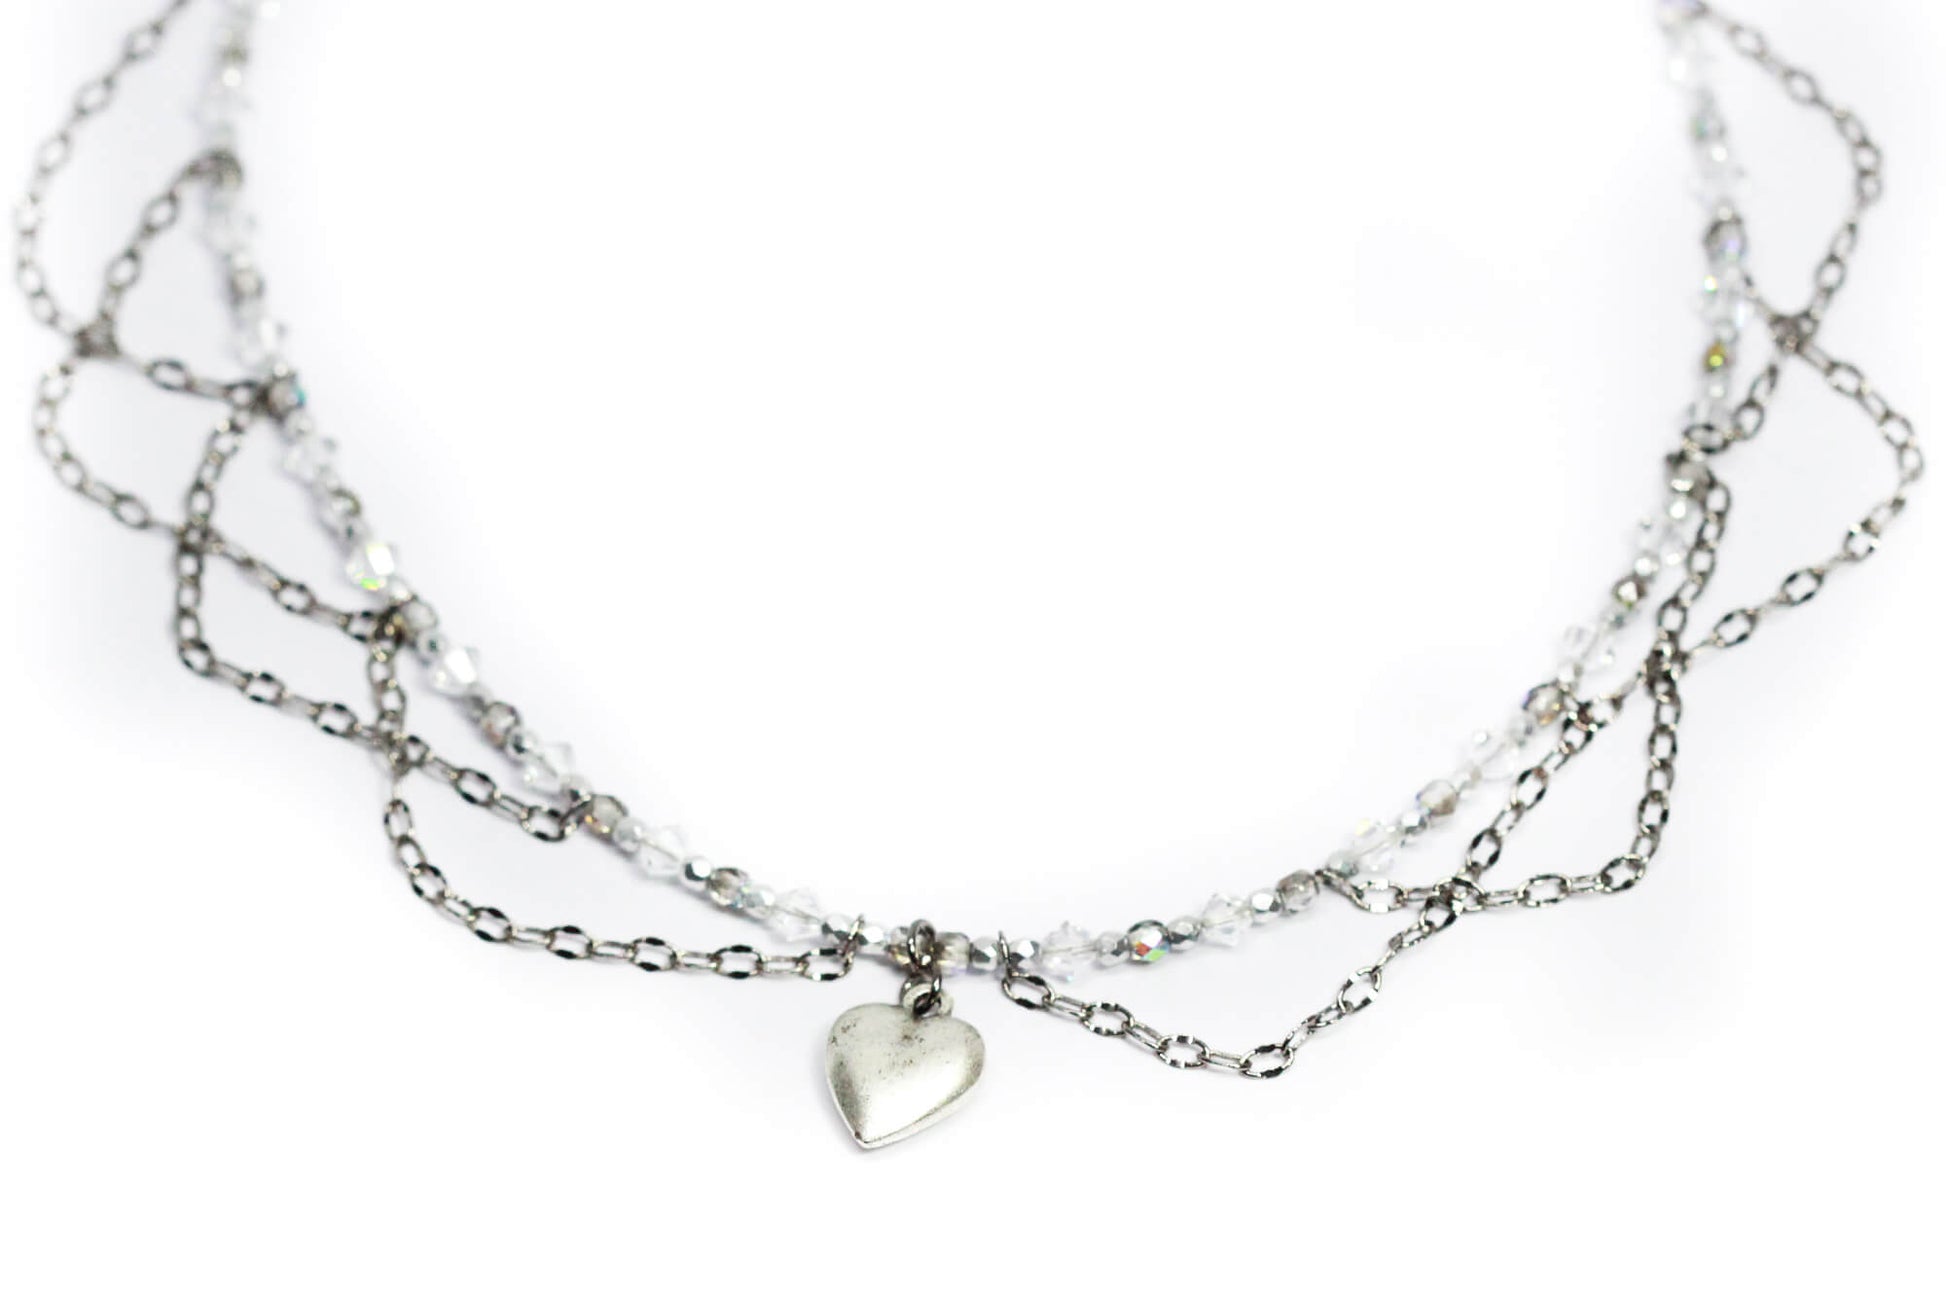 Silver Heart Crystal Necklace - 1940s Sweetheart jewelry inspired necklace